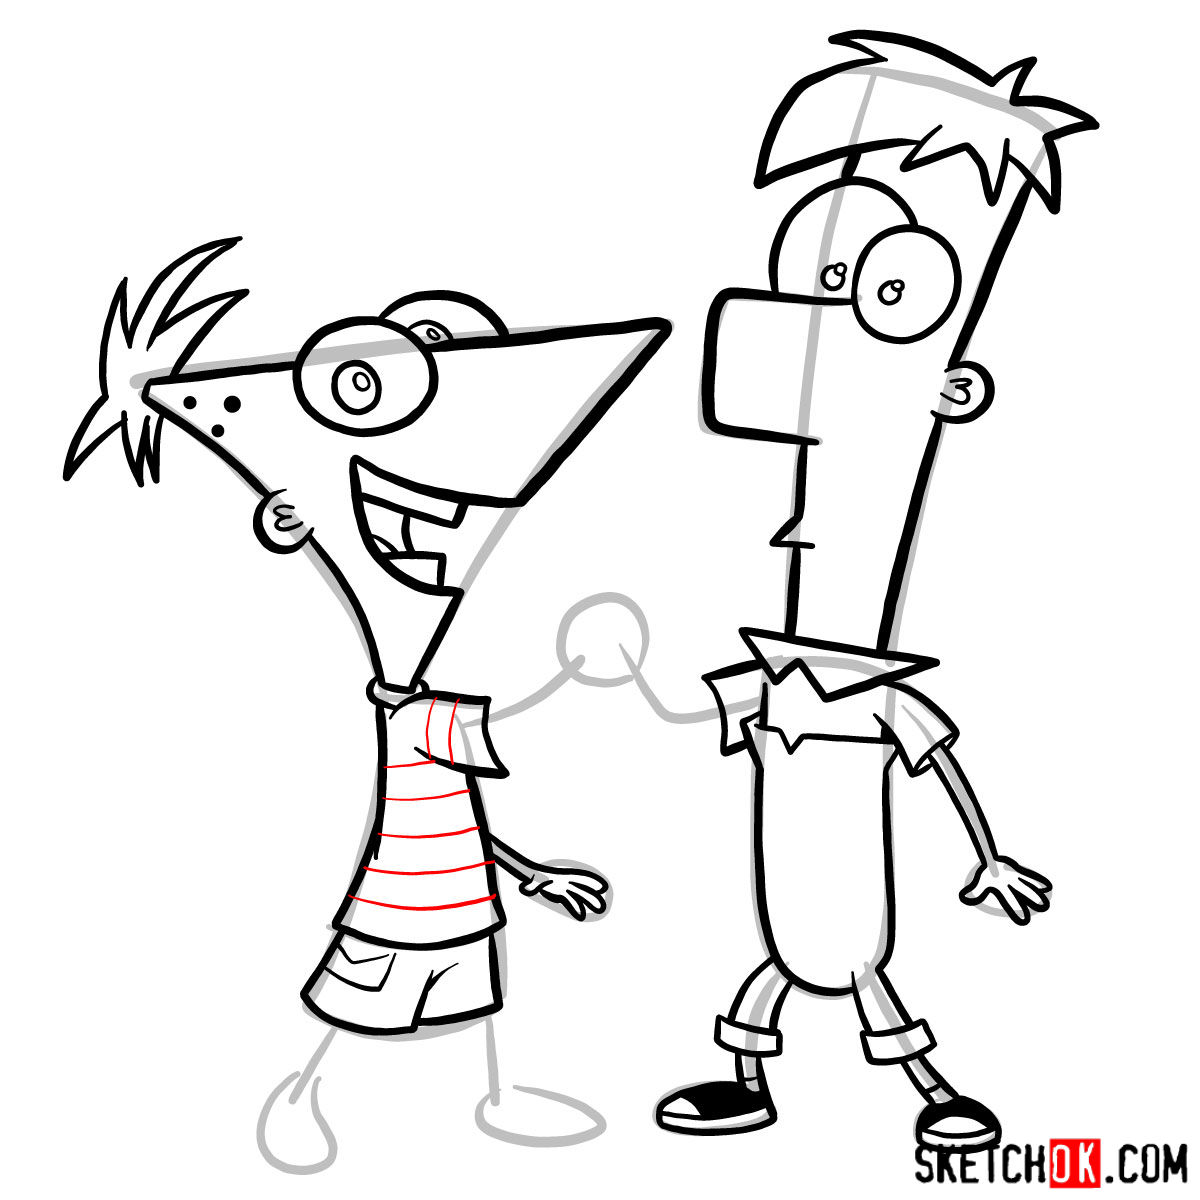 How to draw Phineas and Ferb - step 14